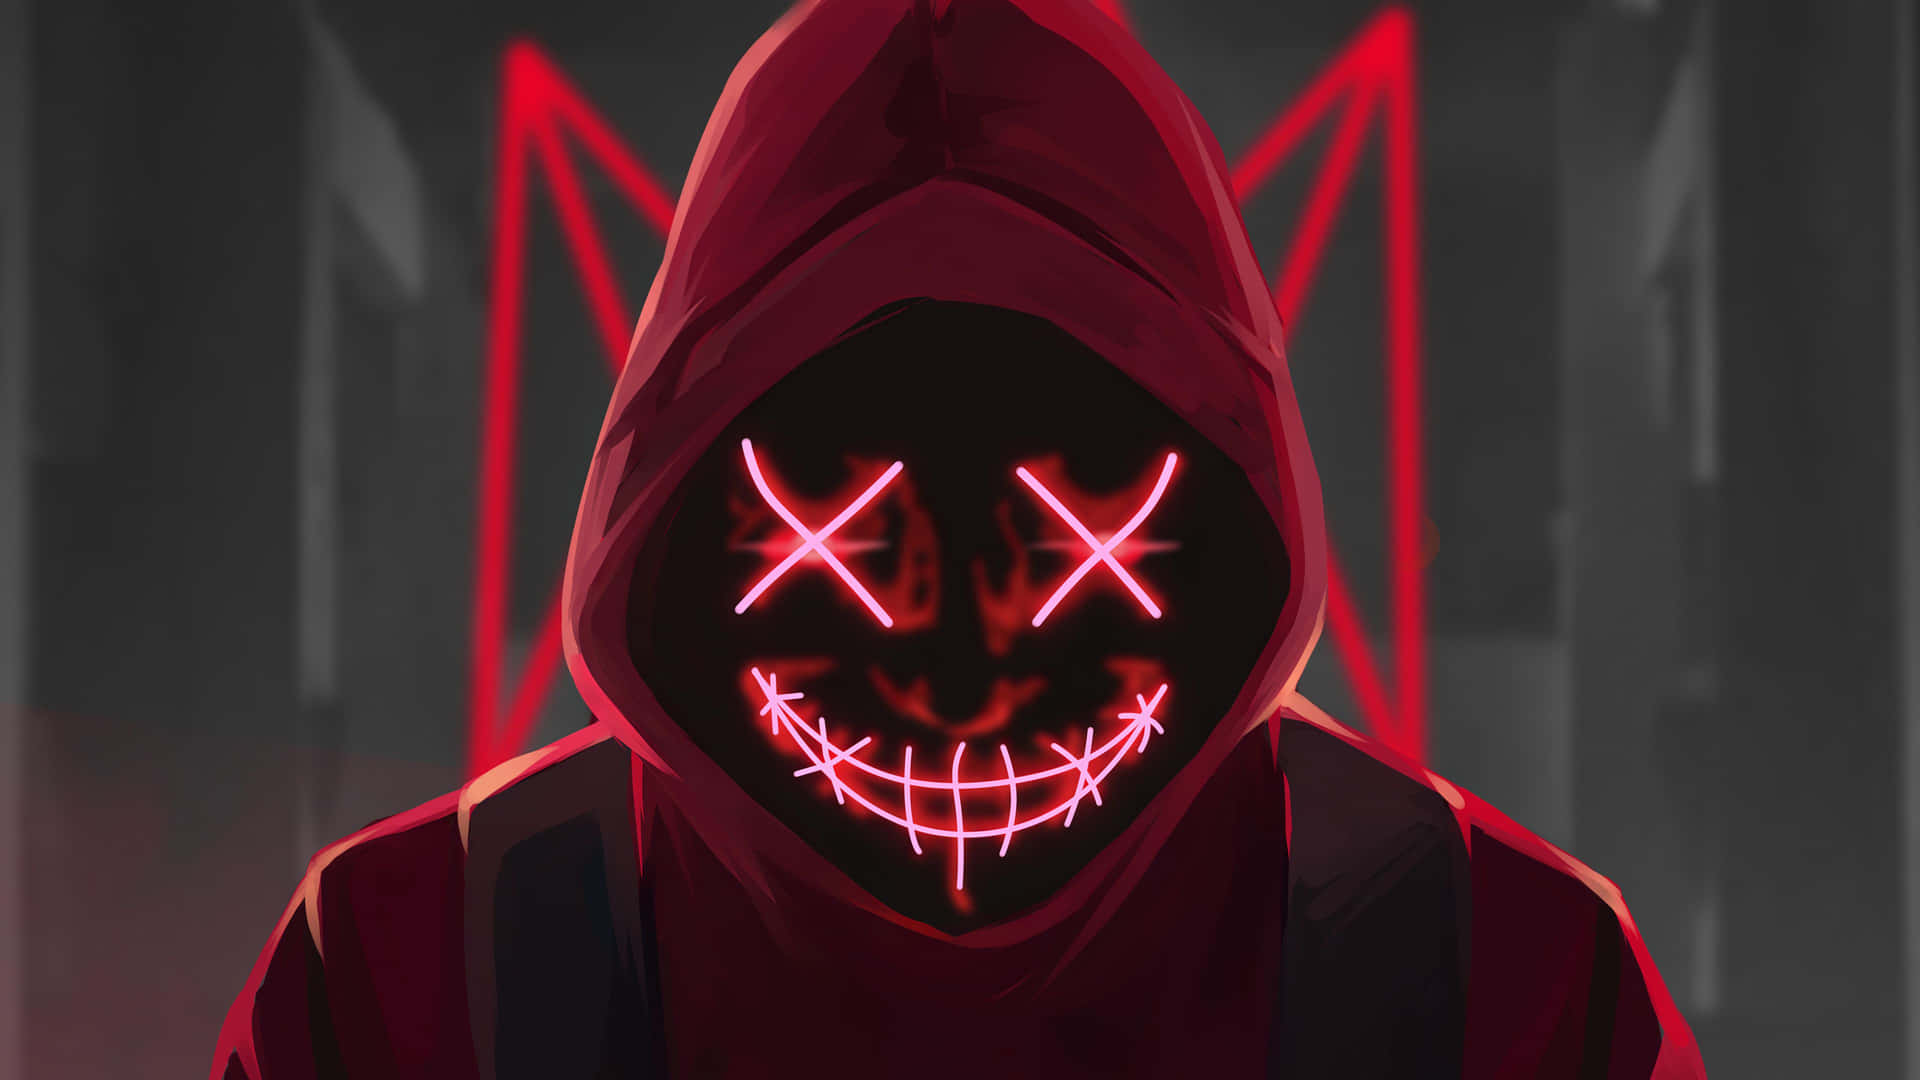 A Red Hooded Man With Red Lights On His Face Wallpaper